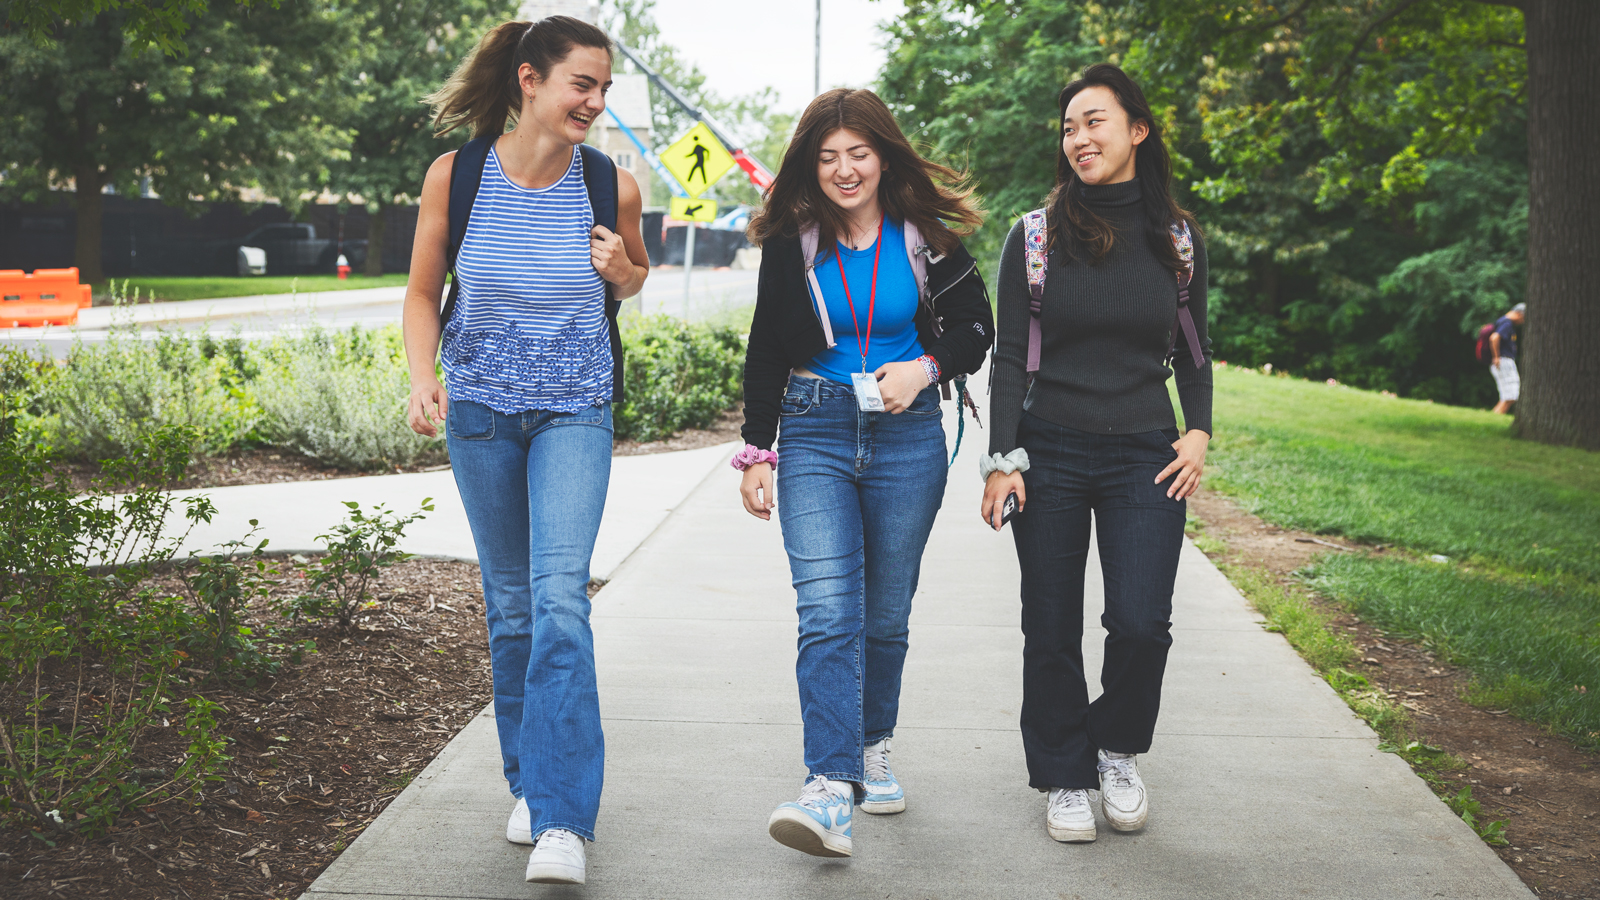 Three female students walk in a row along a sidewalk at Cornell University smiling and laughing.